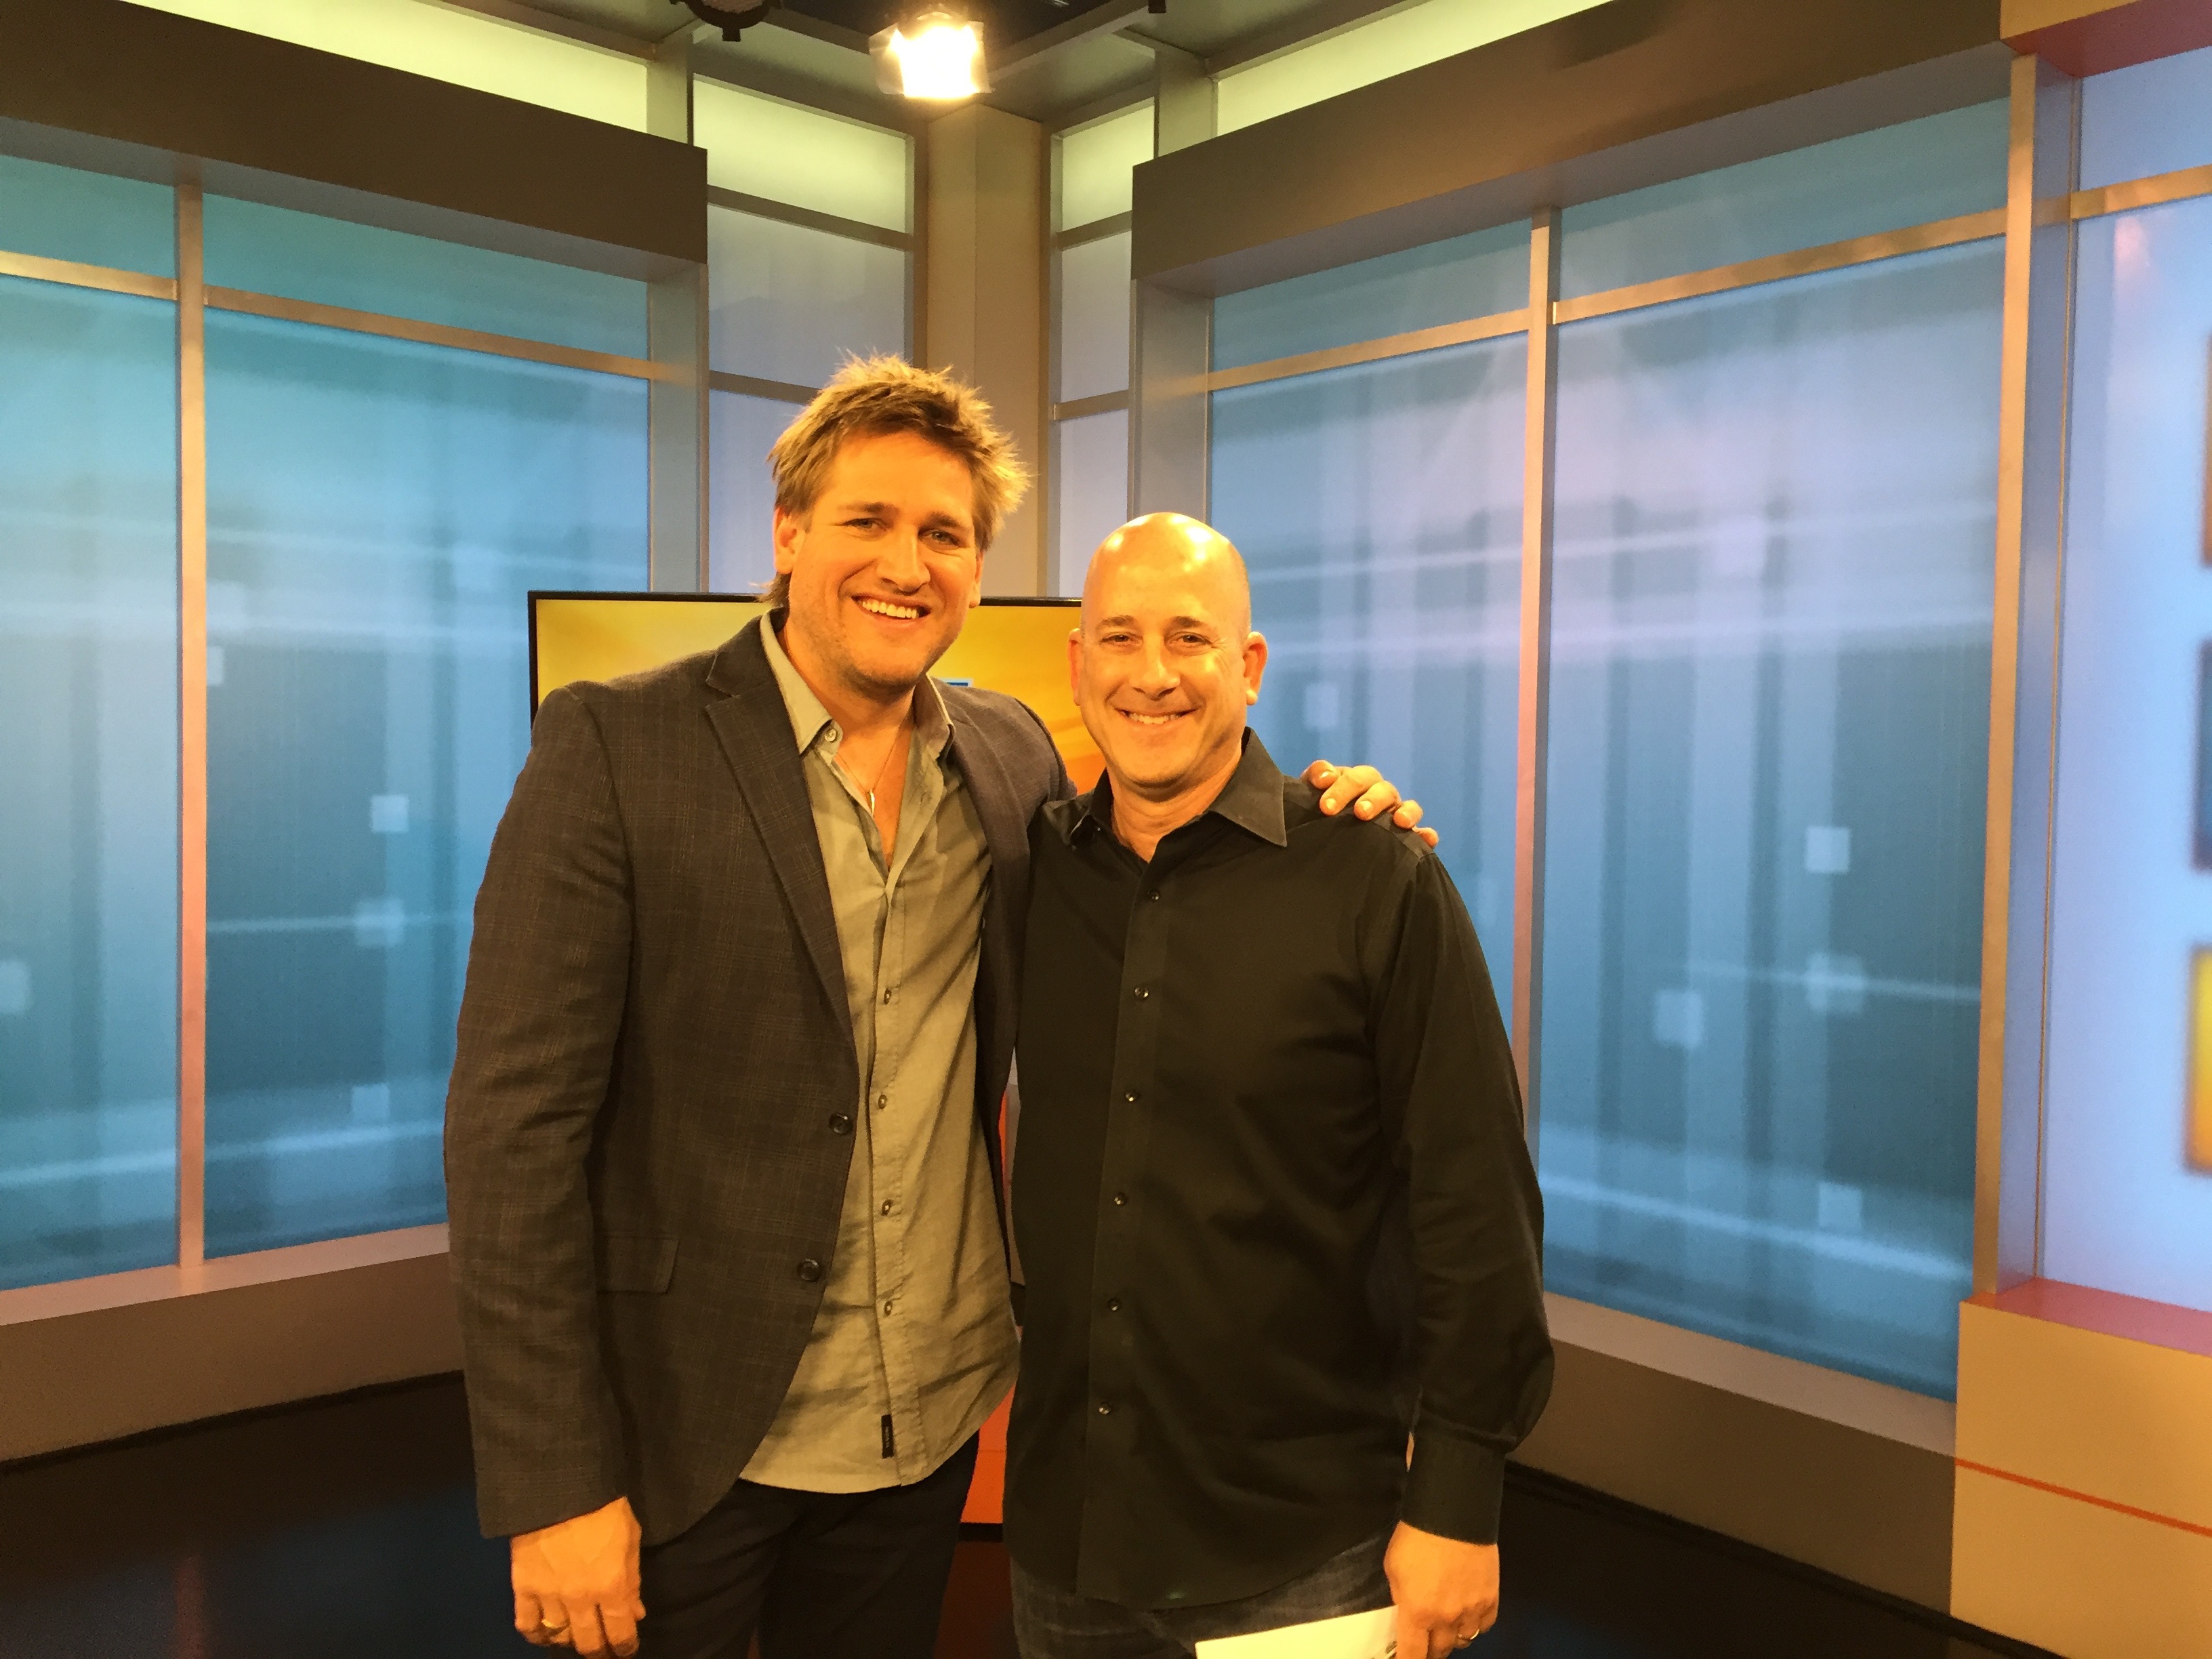 with chef Curtis Stone